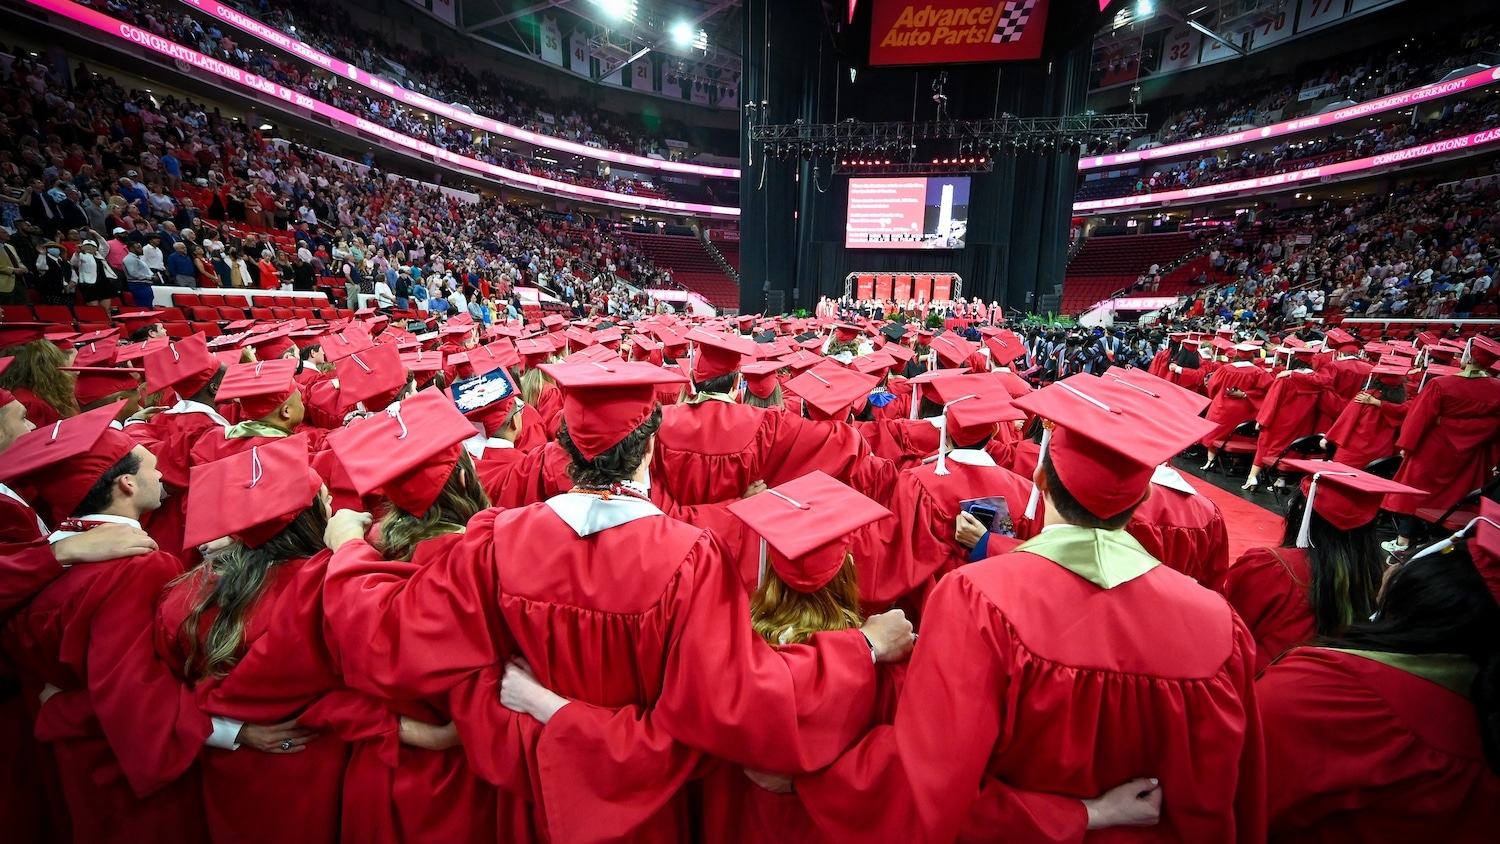 Graduates stand together and embrace each other during the commencement ceremony at PNC Arena USDA Chief Scientist Chavonda Jacobs-Young To Deliver NC State Fall Commencement address - College of Natural Resources News NC State University